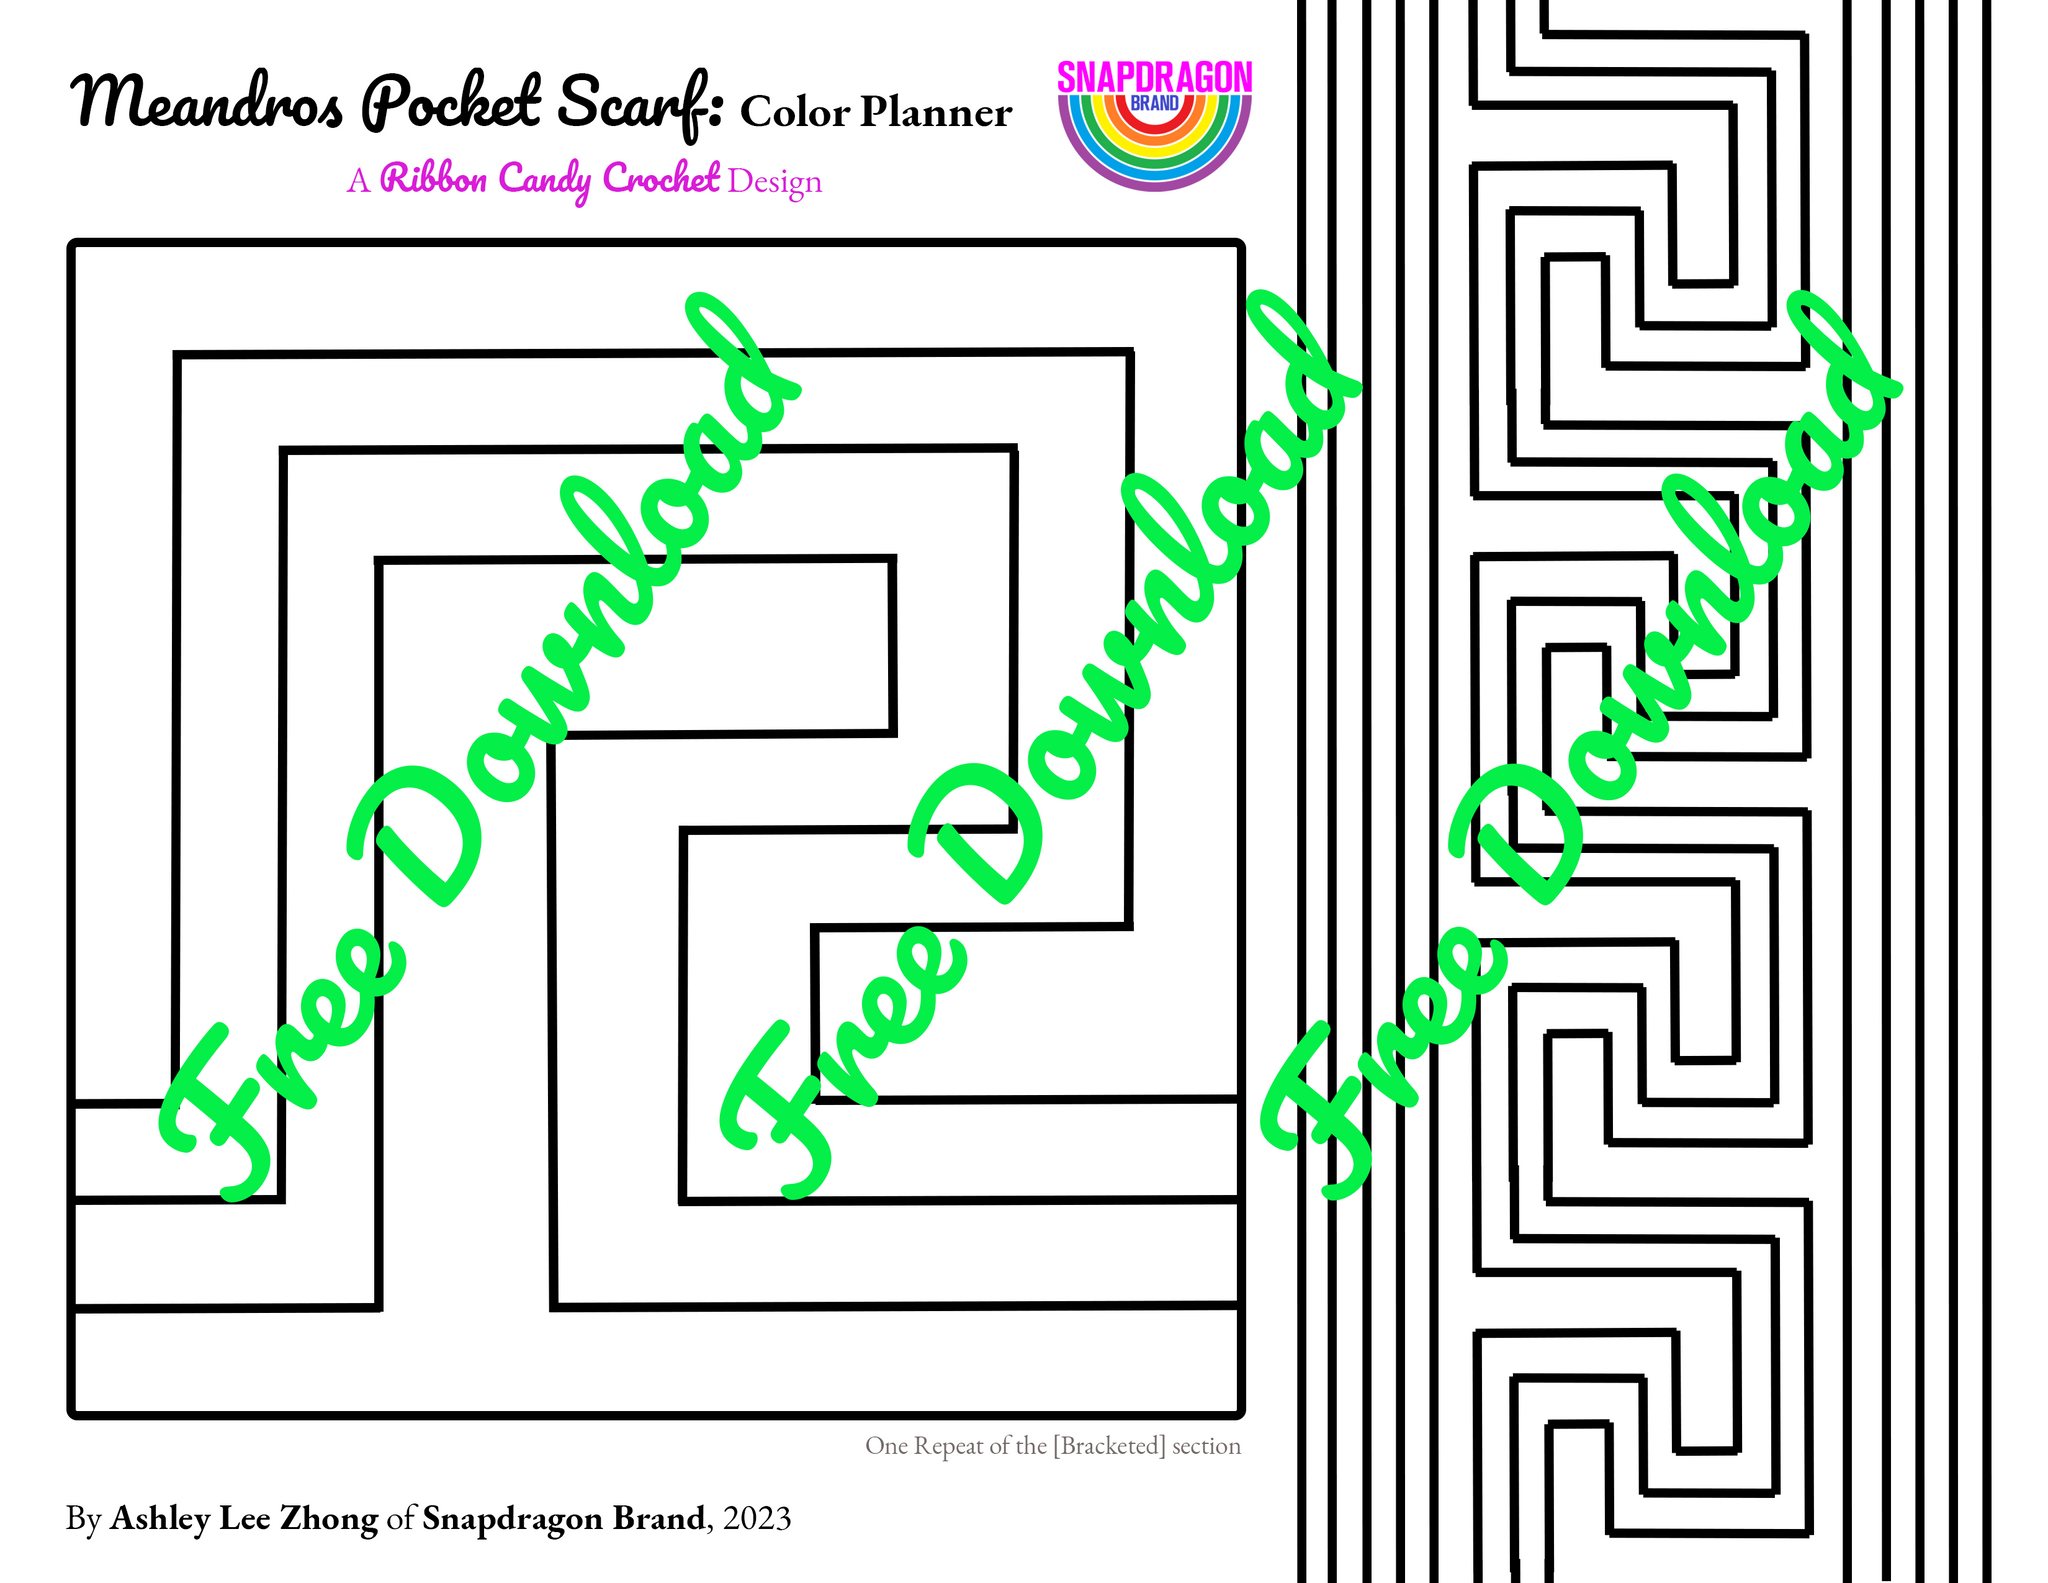 FREE Downloadable Coloring Sheet: Meandros Pocket Scarf